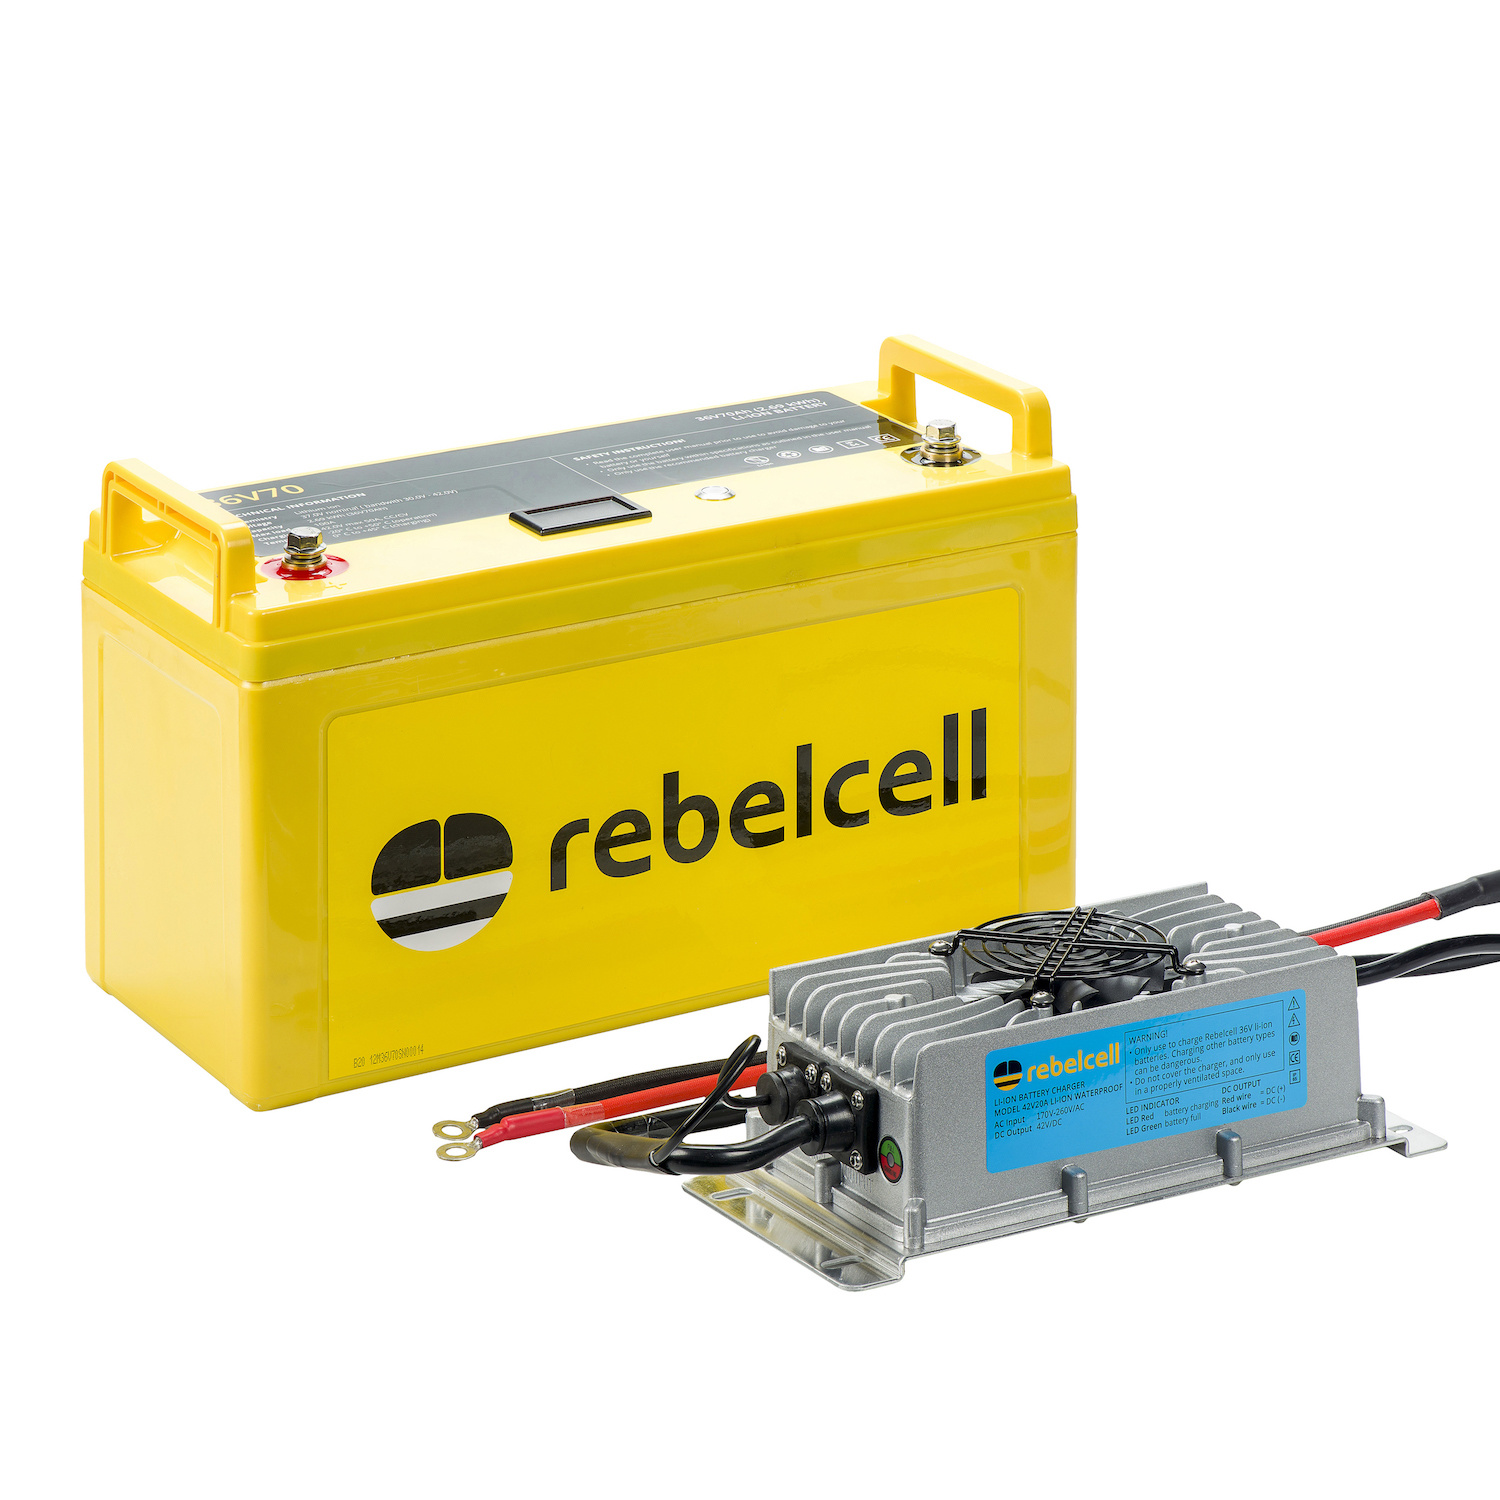 Rebelcell 36V70 accu | Boot4.nl